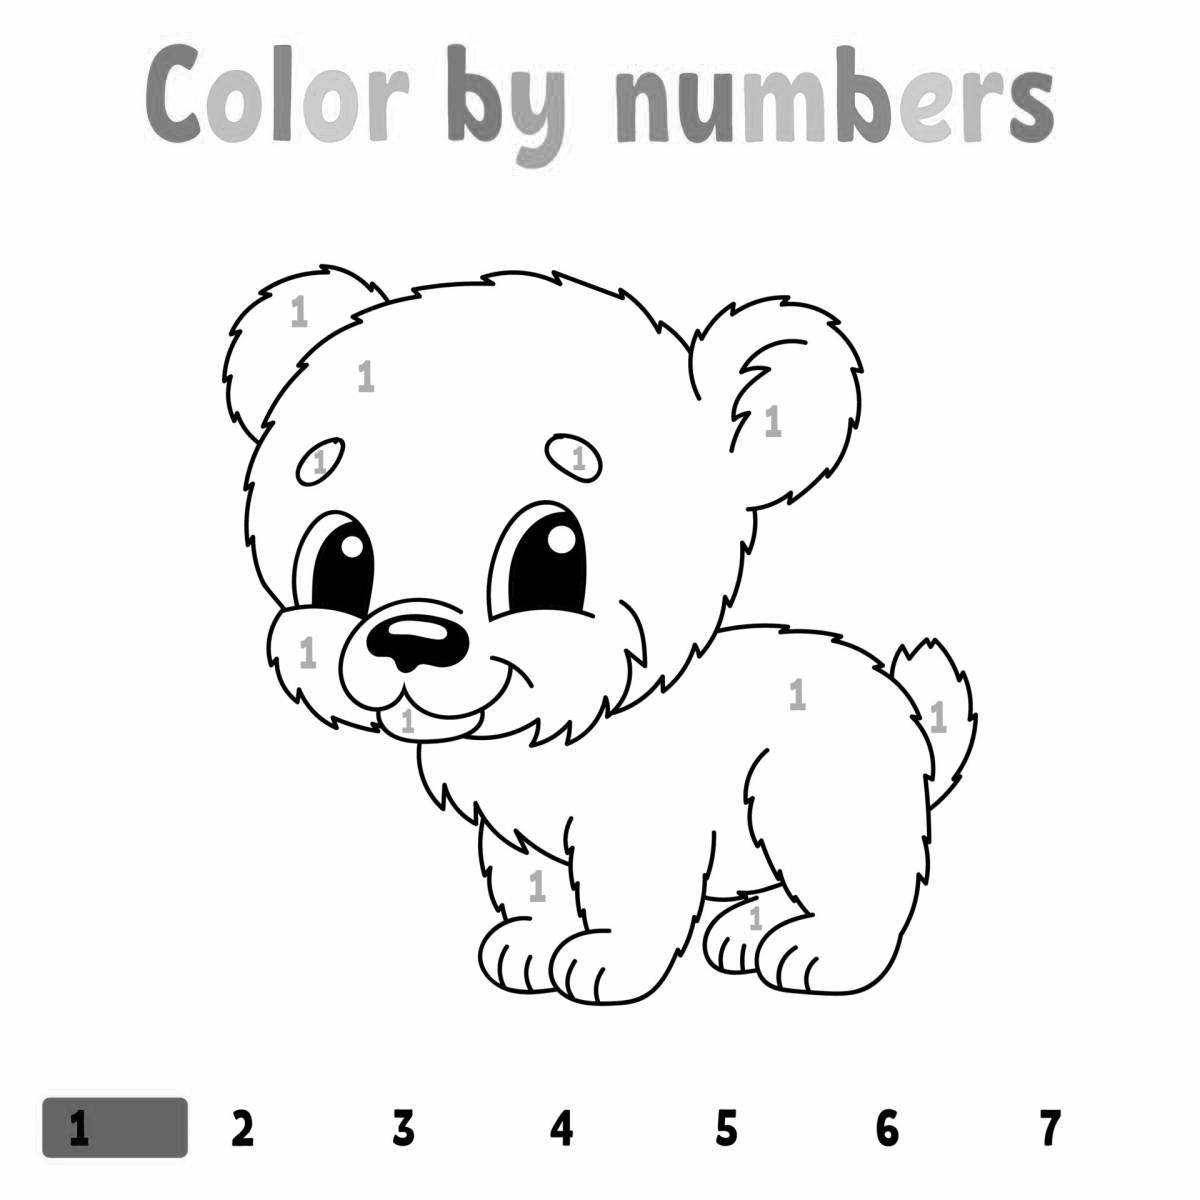 Live bear coloring by numbers